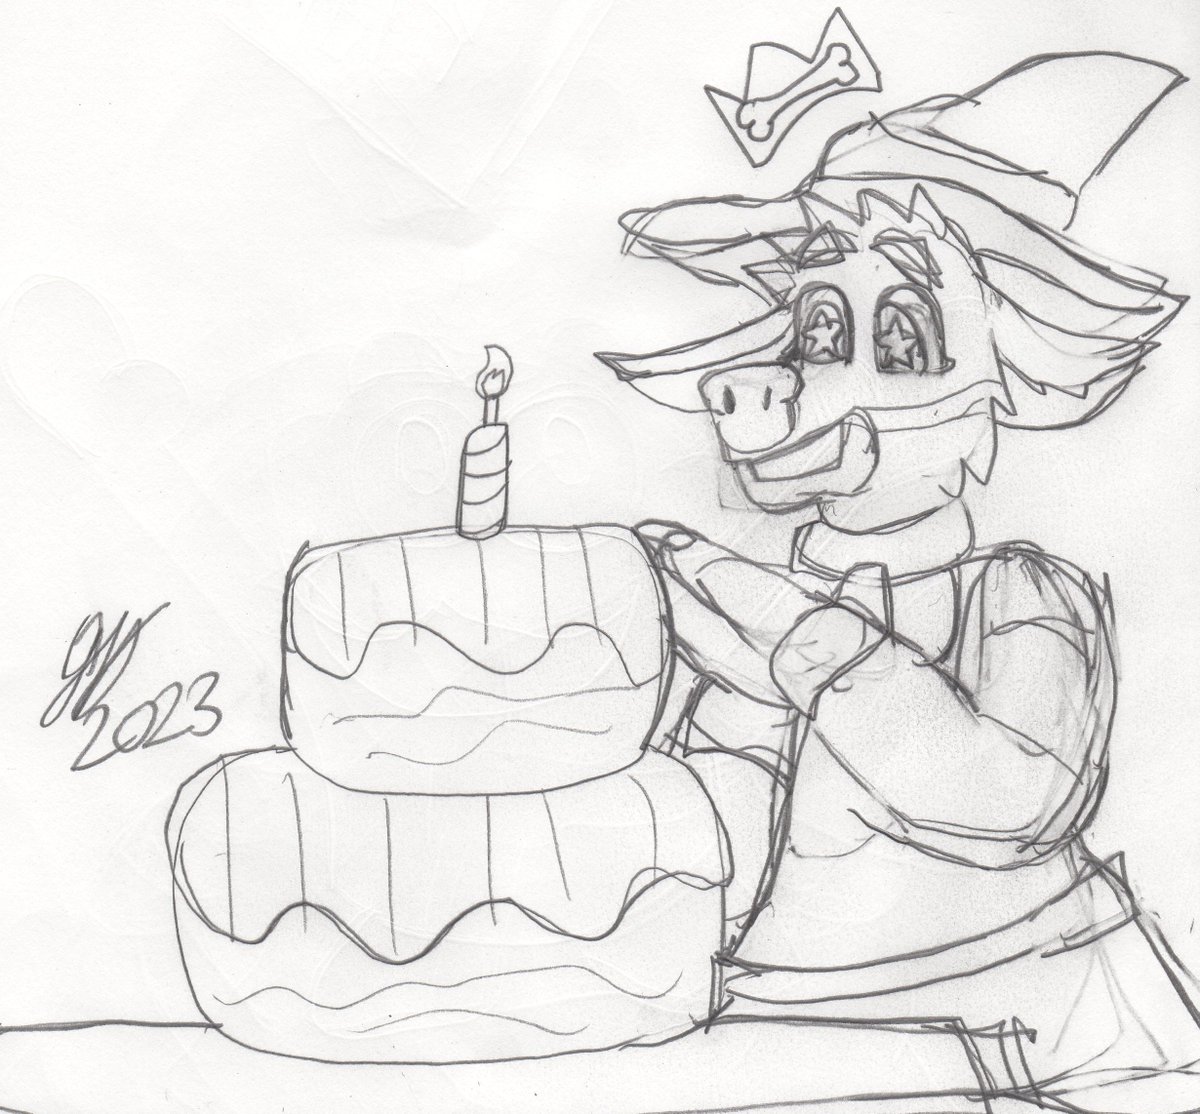 belated birthday doodle for @BrumbleBea! hope you had a good one